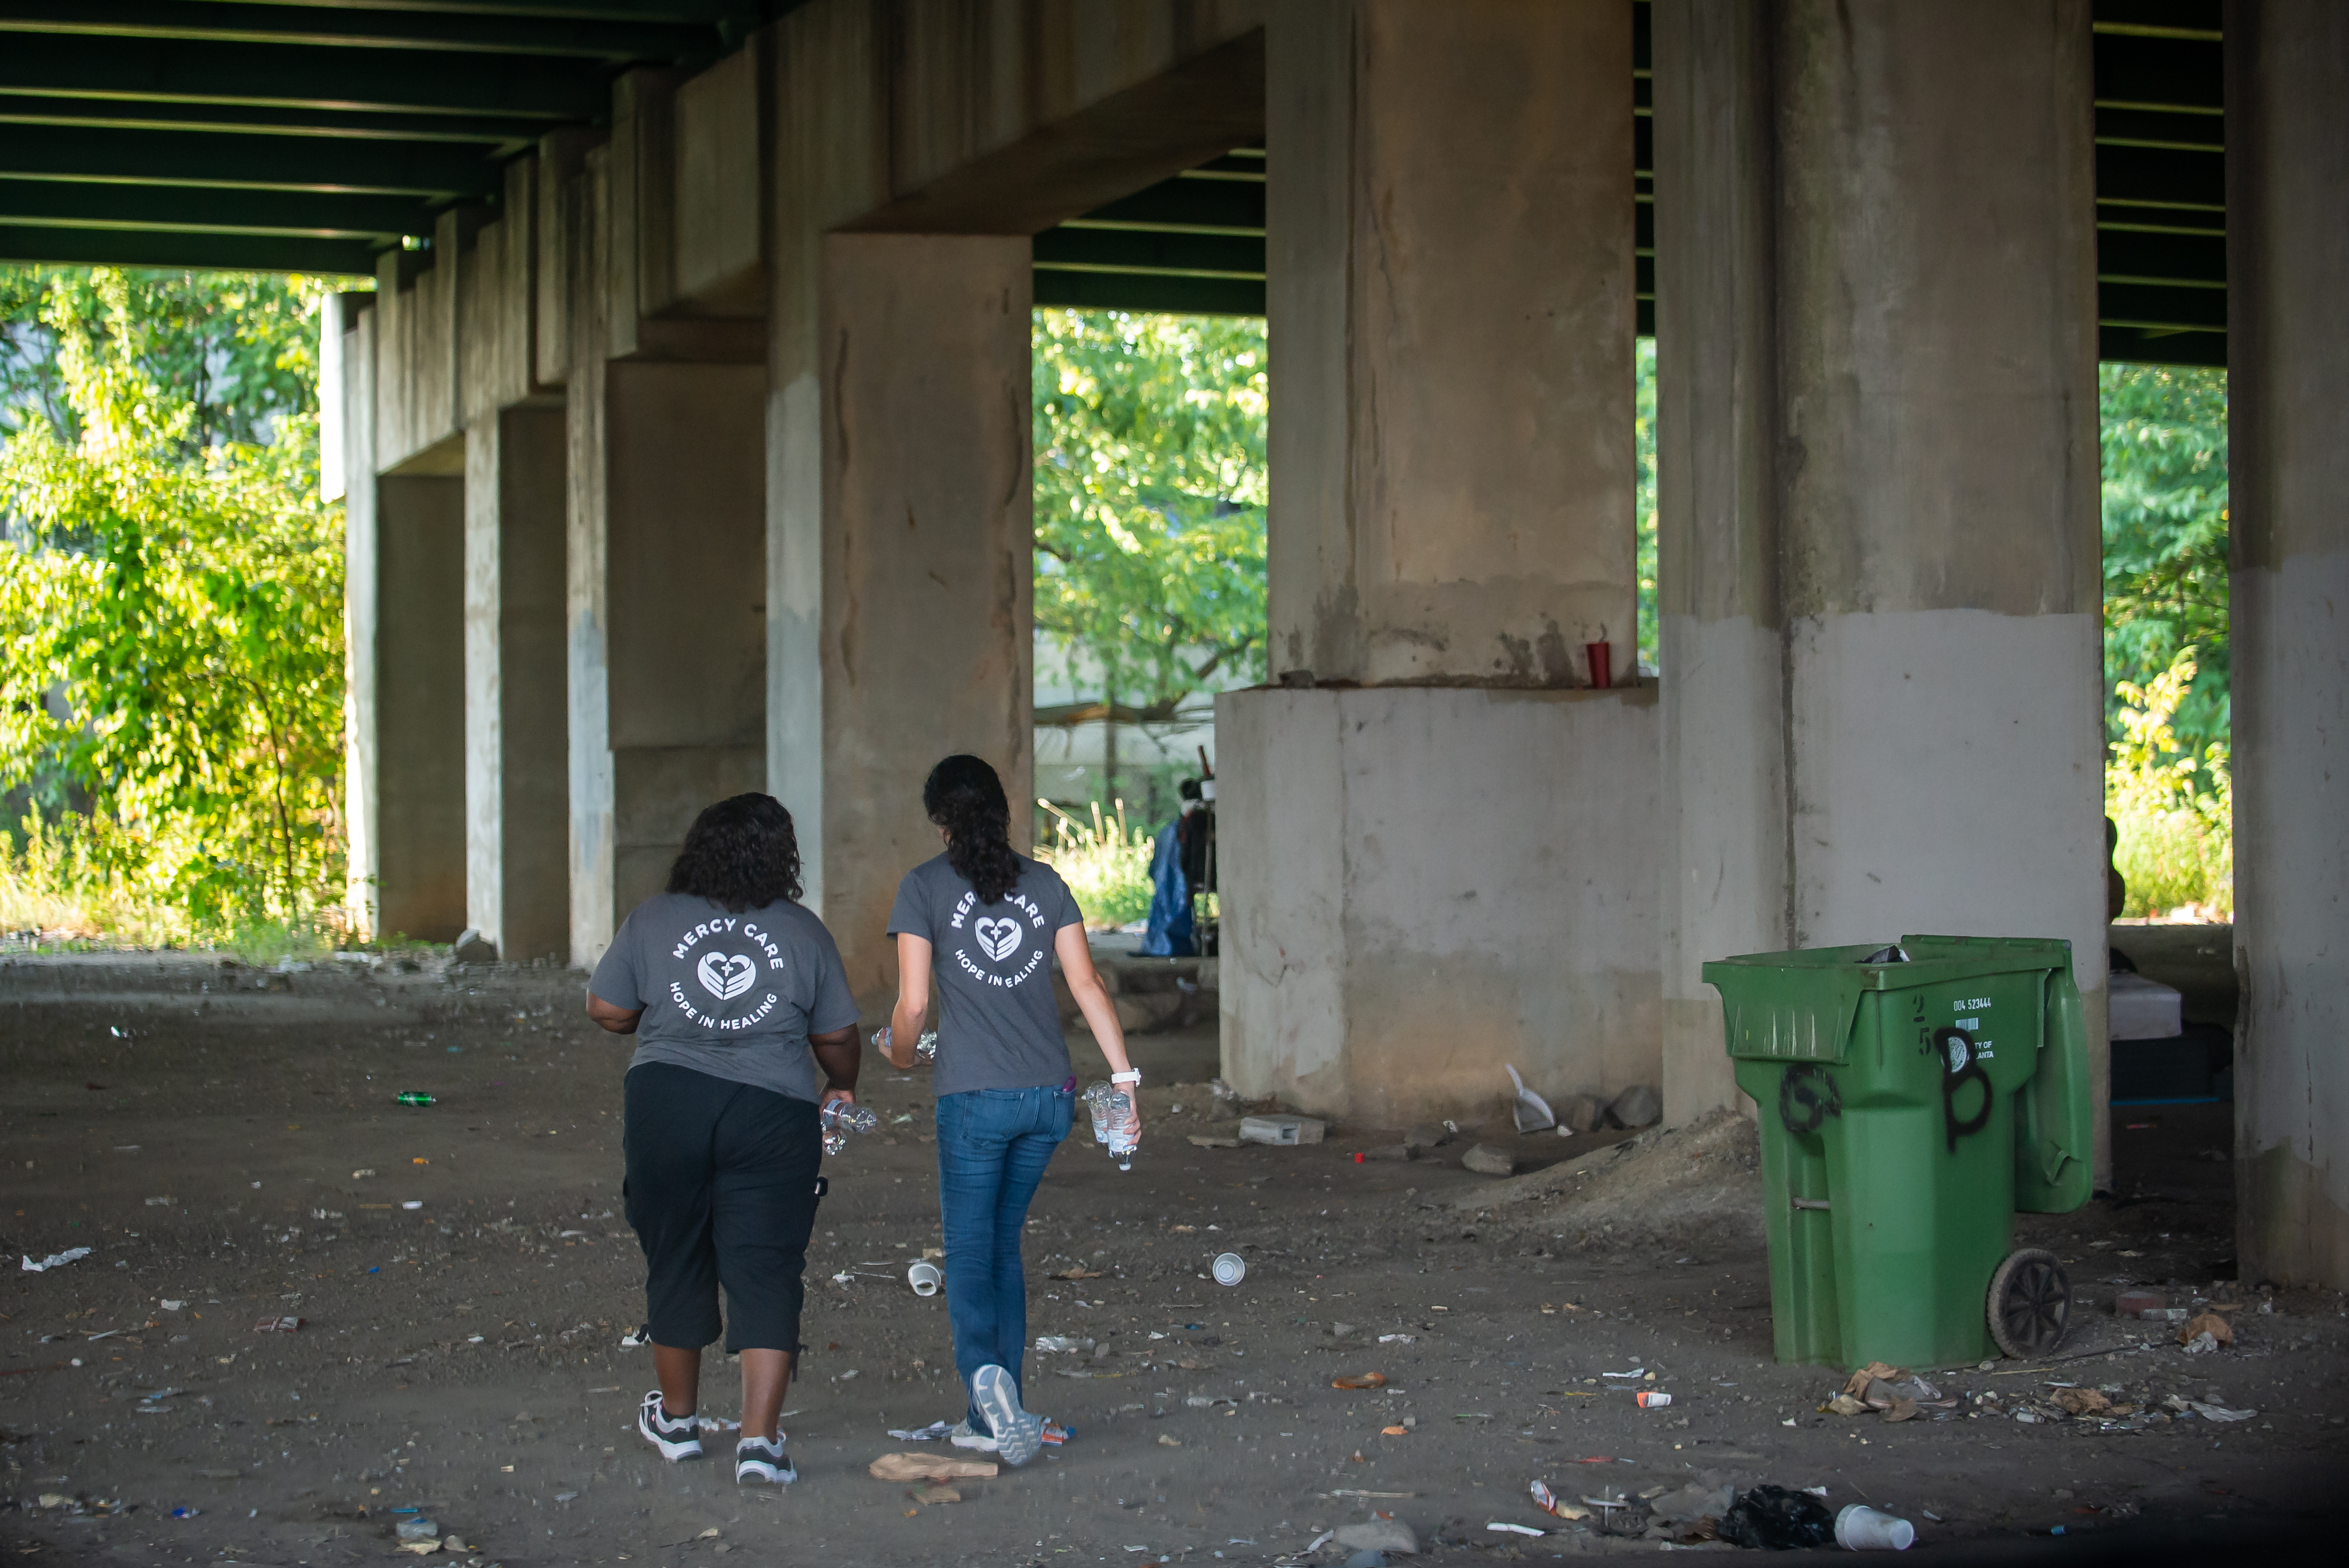 090919 ATLANTA Ð (From left) Stephanie Dotson, a licensed practical nurse, and Joy Fernandez de Narayan, a nurse practitioner, walk under an I-20 bridge in downtown Atlanta after bringing water and checking on people living in tents in the shade of the underpass on Monday, Sept. 9, 2019. Dotson and Fernandez de Narayan are part of the Mercy Care Street Medicine team, and work to provide medical and behavioral health care to the cityÕs homeless population. PHOTO BY BITA HONARVAR